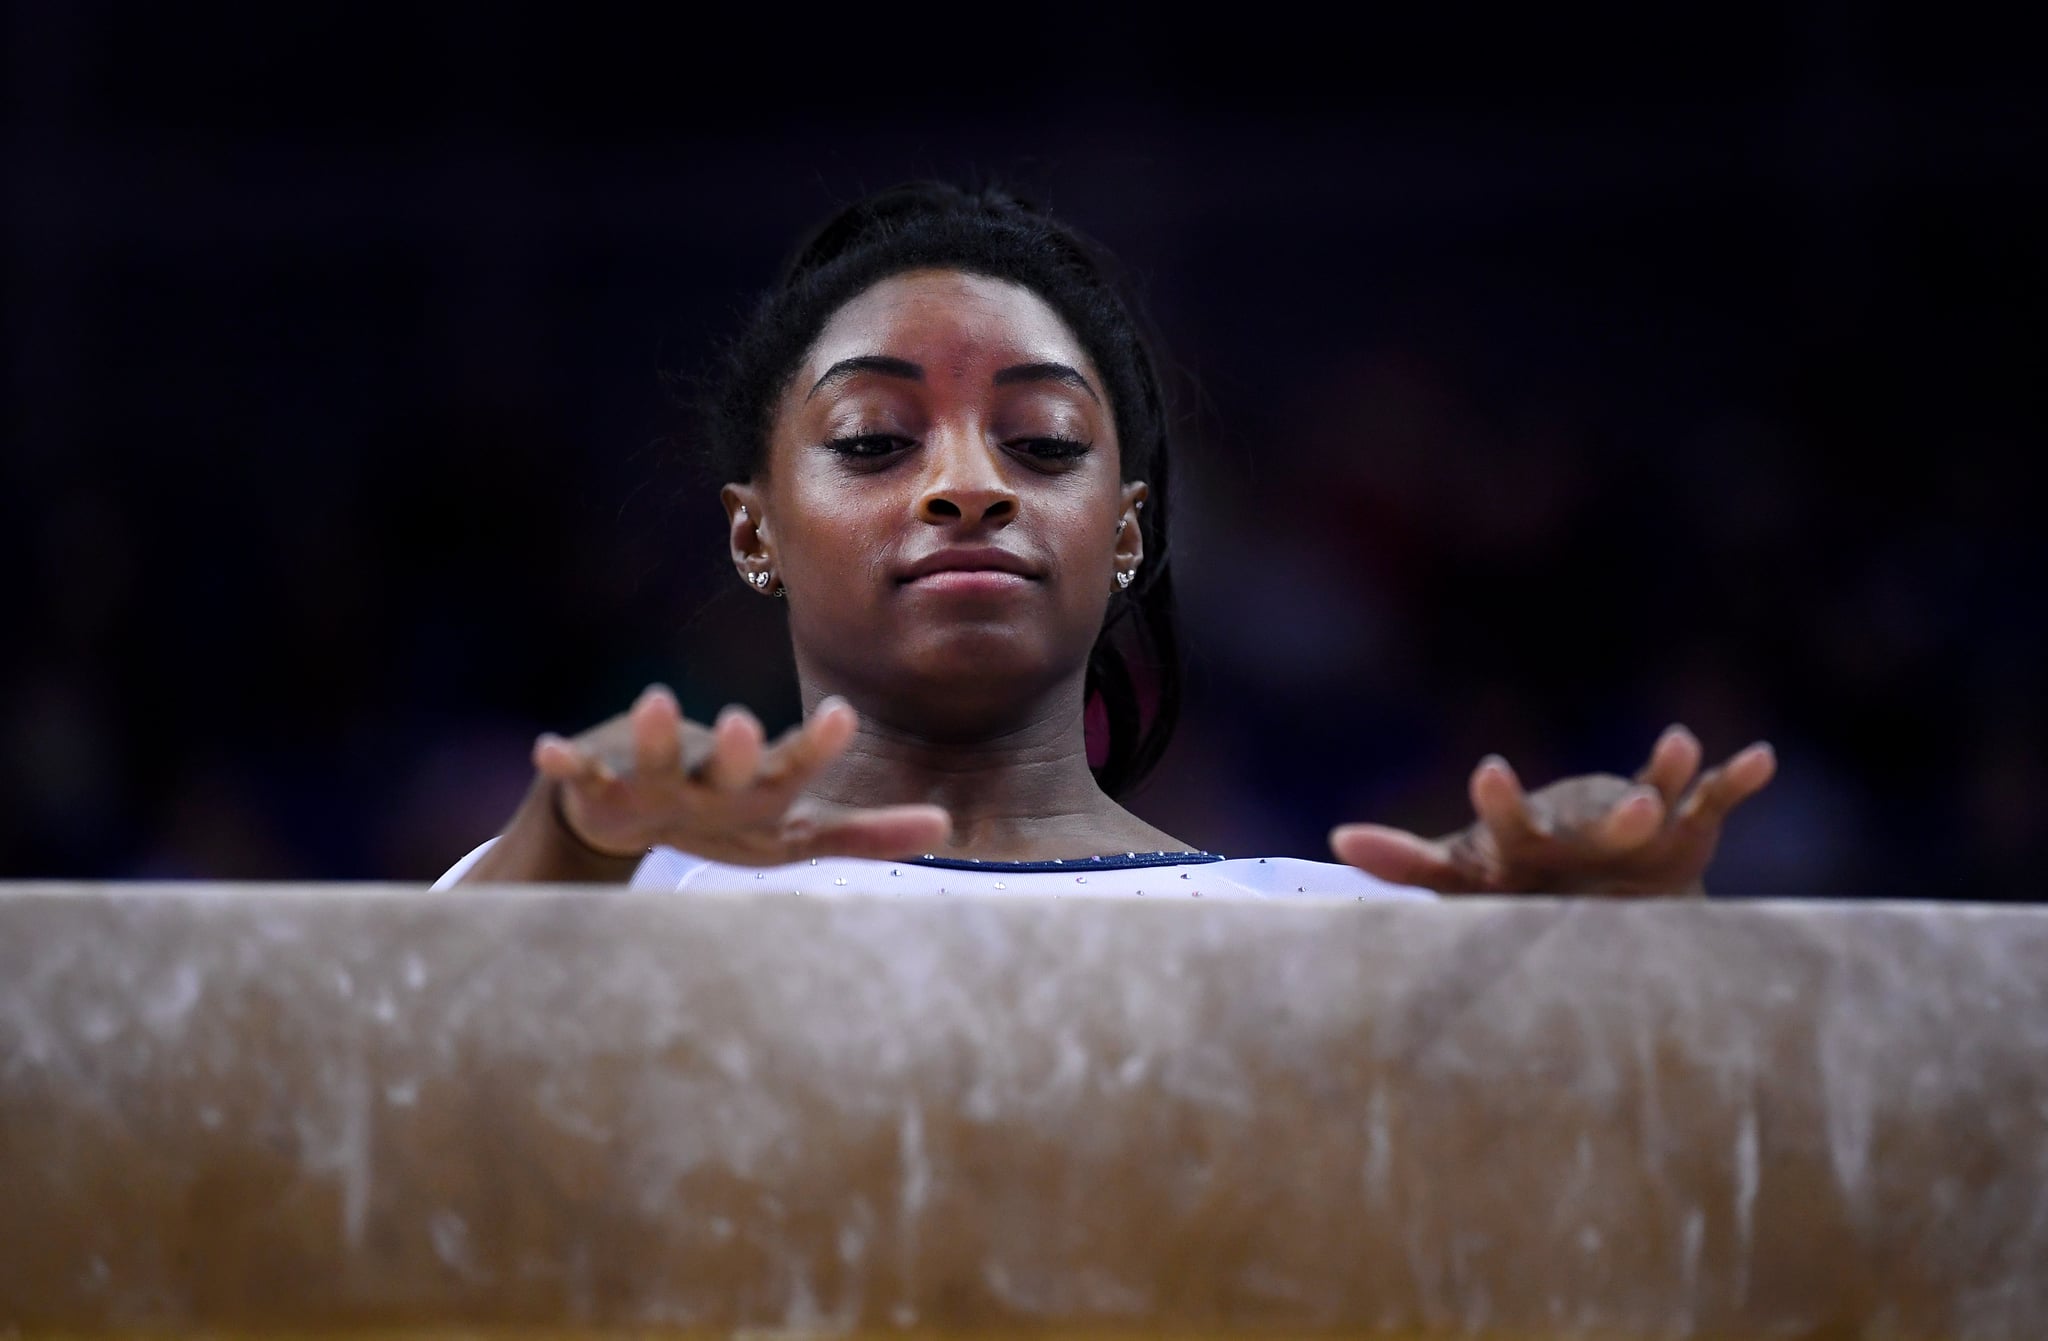 LONDON, ENGLAND - MARCH 23: Simone Biles of the USA performs on balance beam during the Superstars of Gymnastics at The O2 Arena on March 23, 2019 in London, England. (Photo by Laurence Griffiths/Getty Images)